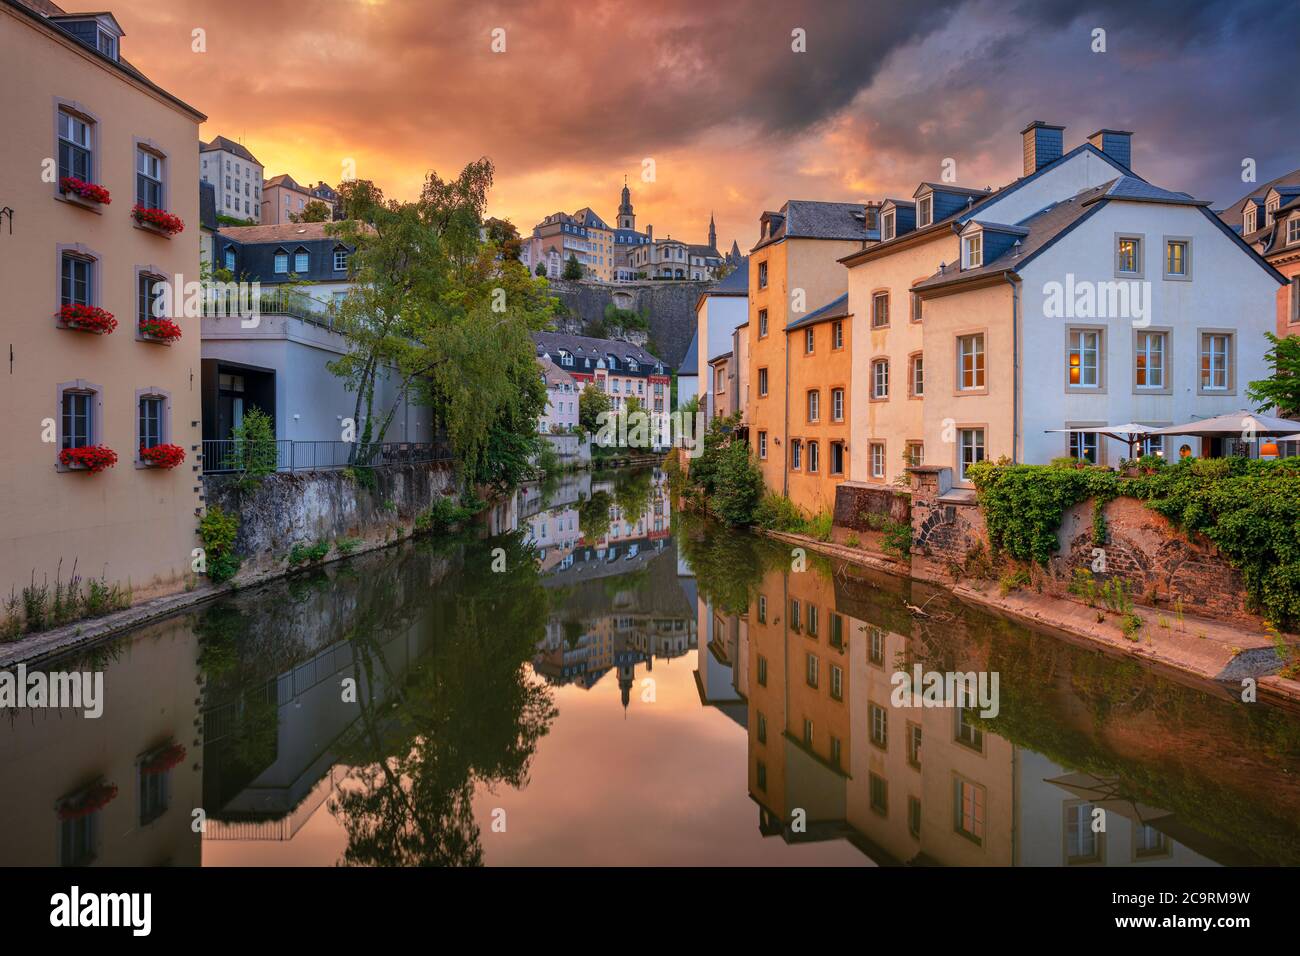 Luxembourg City, Luxembourg. Cityscape image of old town Luxembourg skyline during beautiful summer sunset. Stock Photo